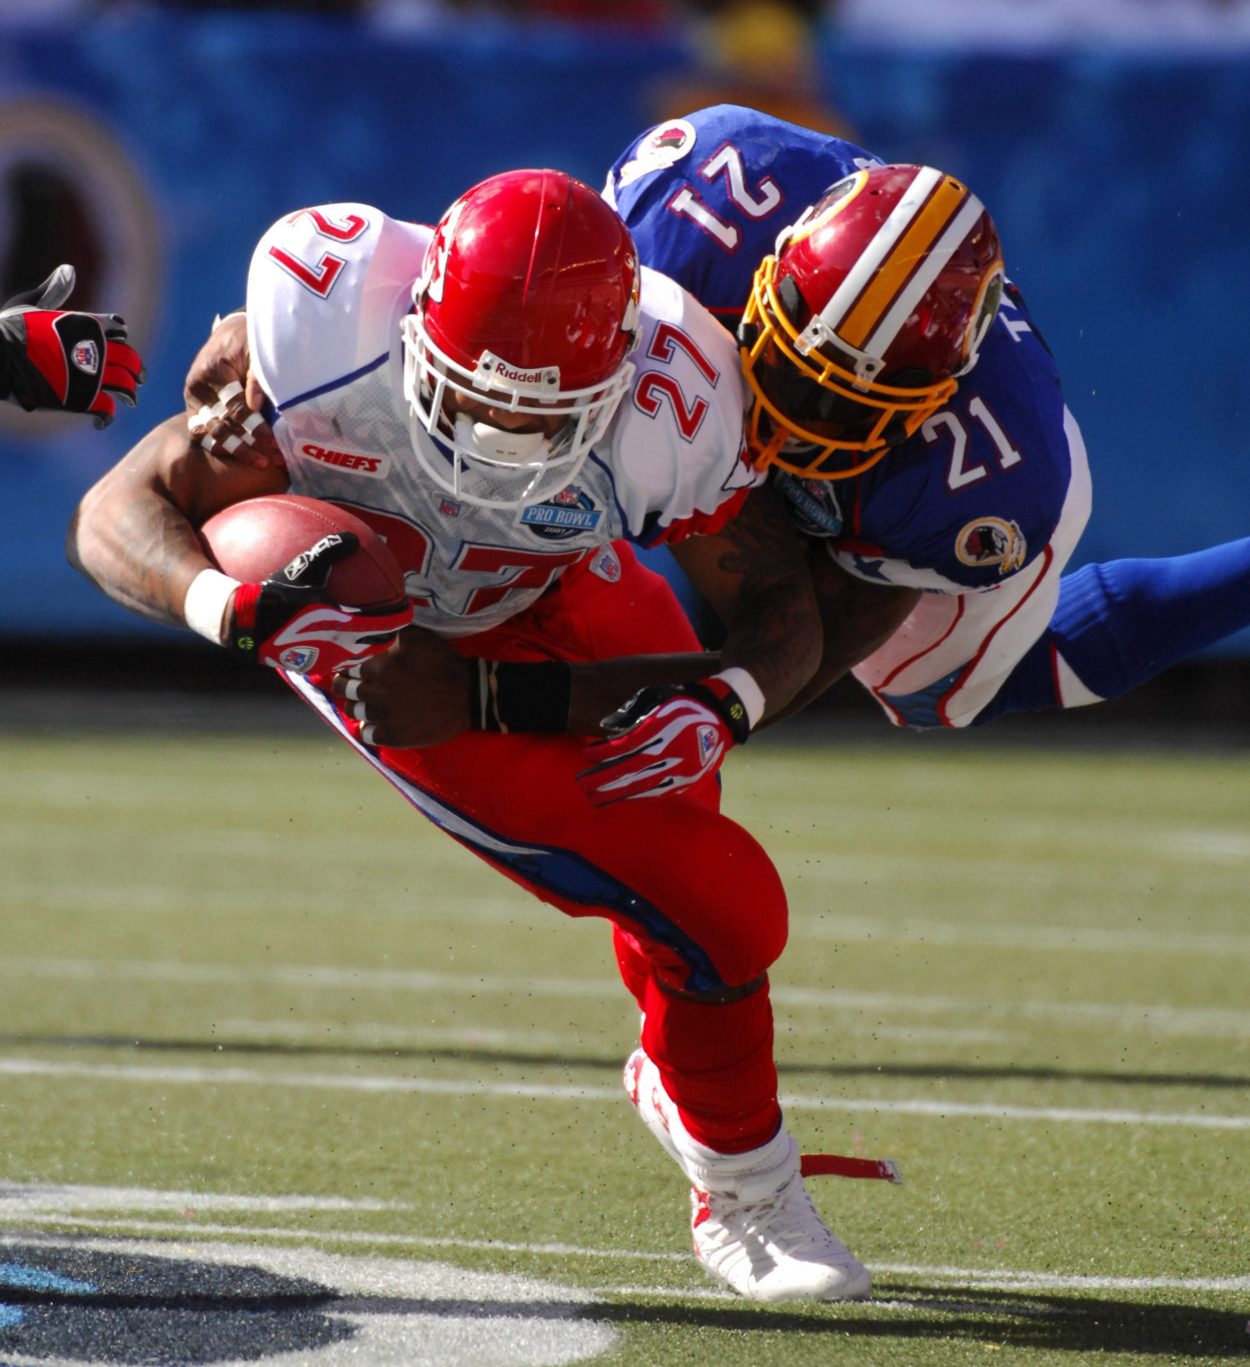 Sean Taylor makes a tackle in the 2007 Pro Bowl